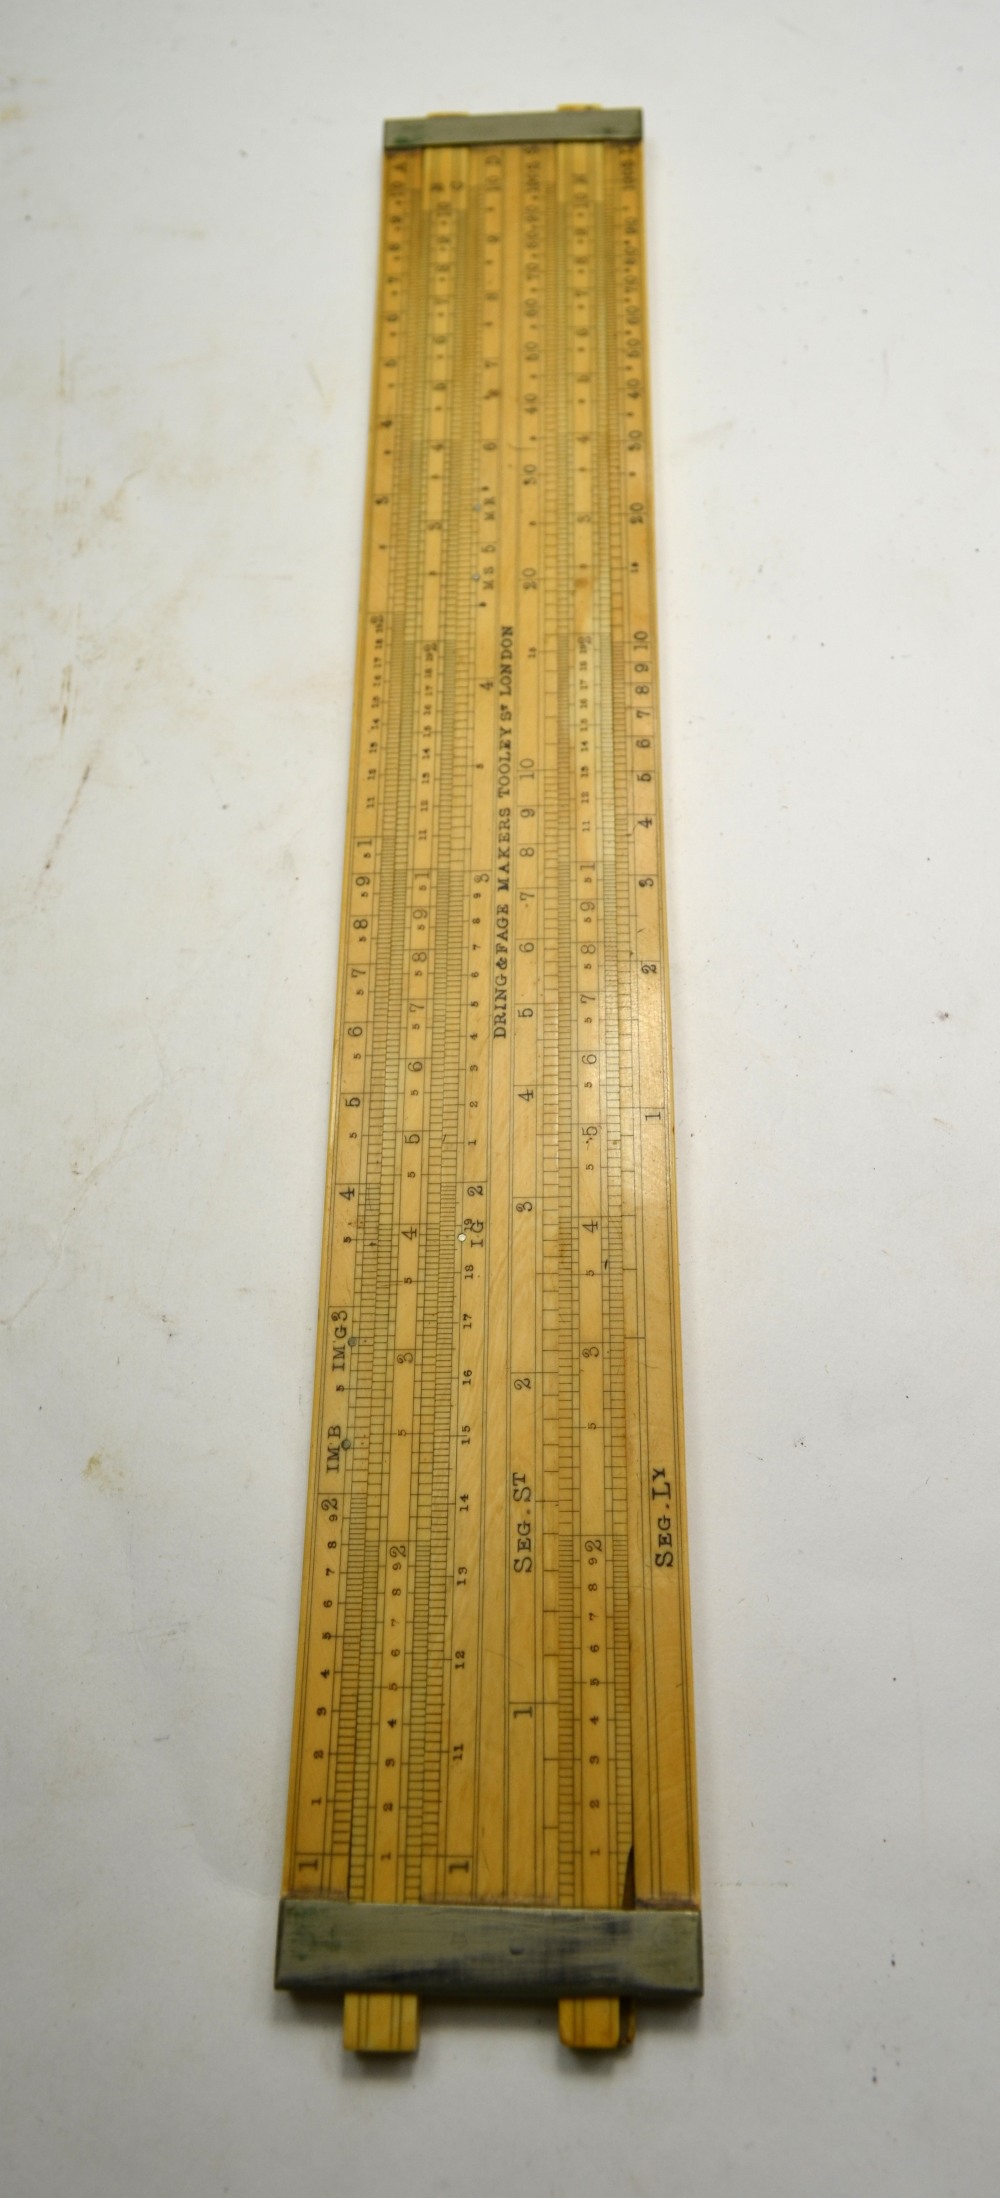 A Dring & Fage ivory brewery gauger's slide rule with nickel straps and two slides, in leather case, - Image 4 of 7